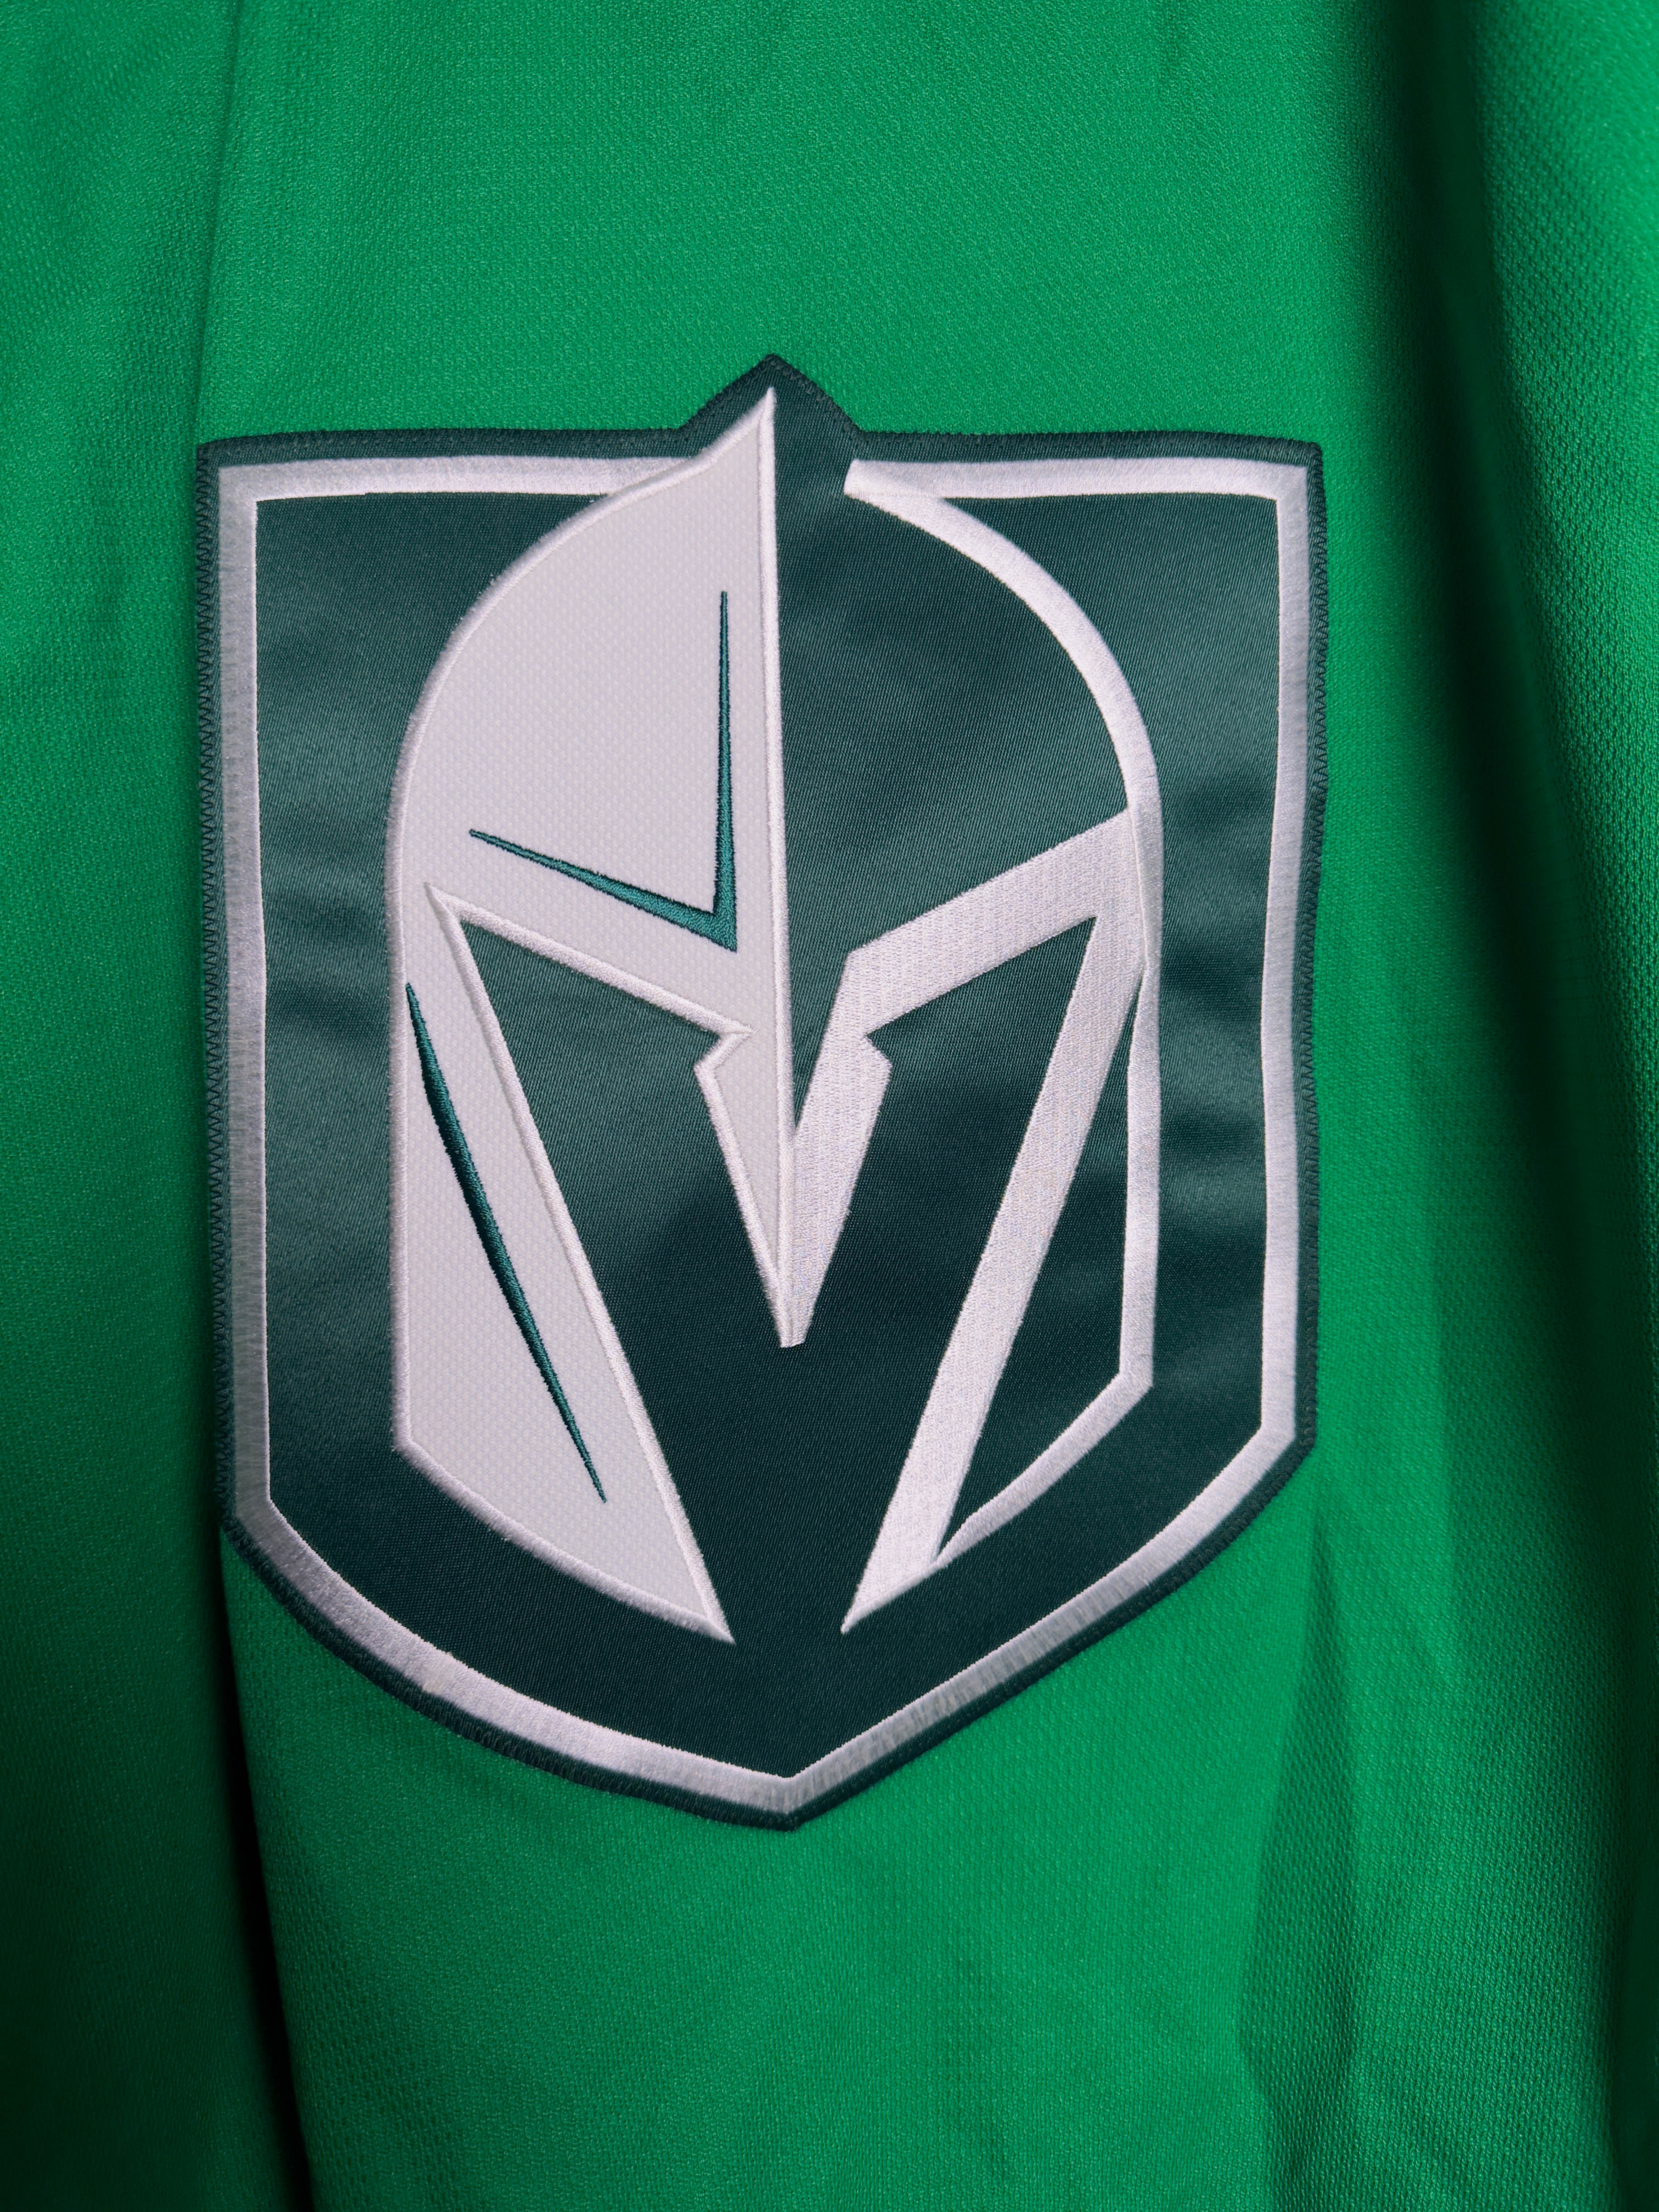 Vegas Golden Knights NHL Adidas MiC Team Issued Shamrock Green Jersey Size 56 (Player Size)